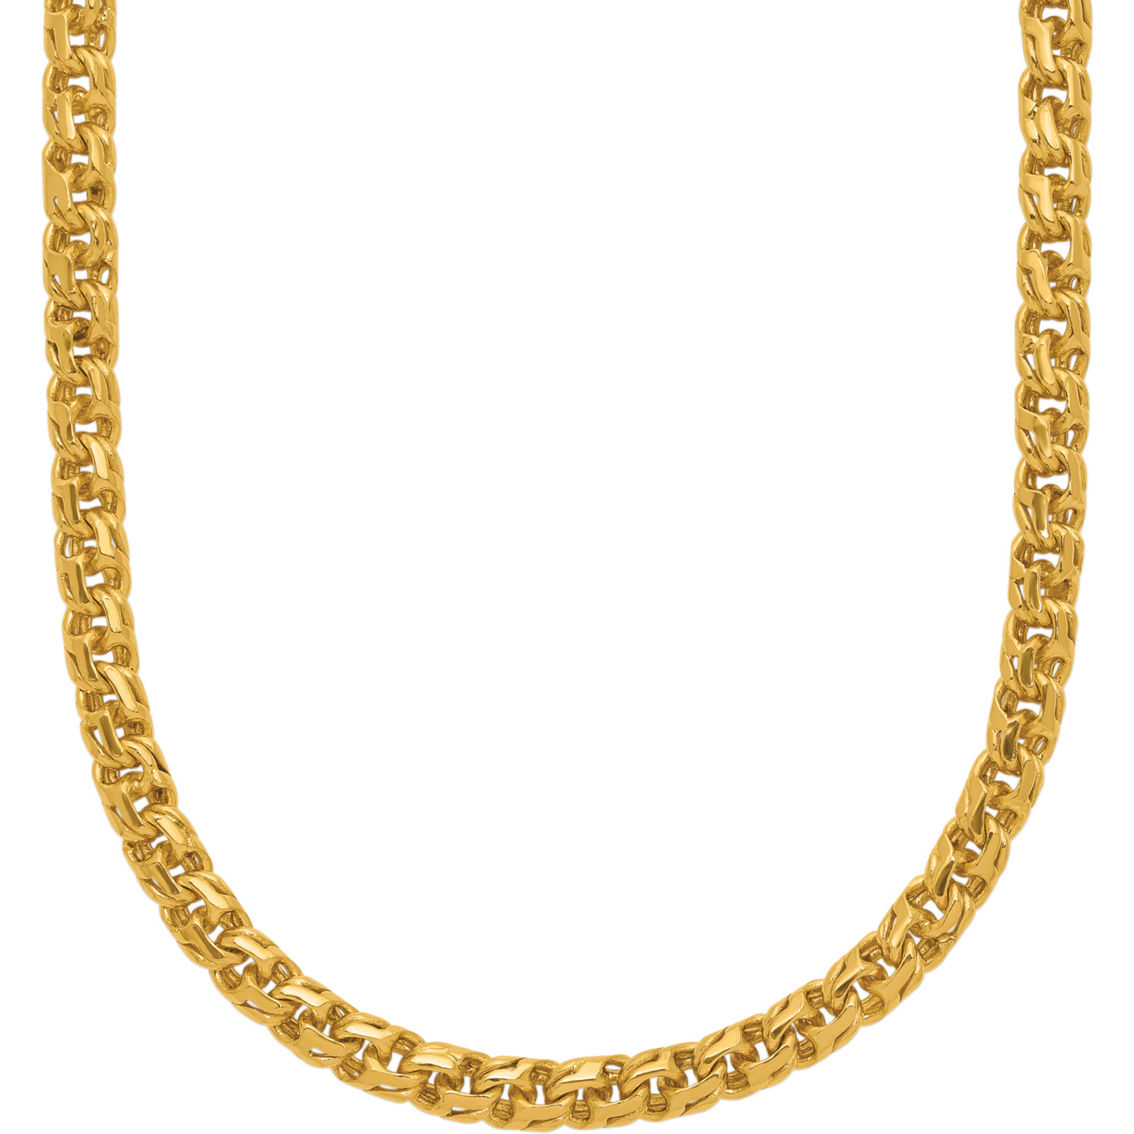 24K Pure Gold 24K Yellow Gold Double Interlocking 20 in. Curb Chain - Image 3 of 5